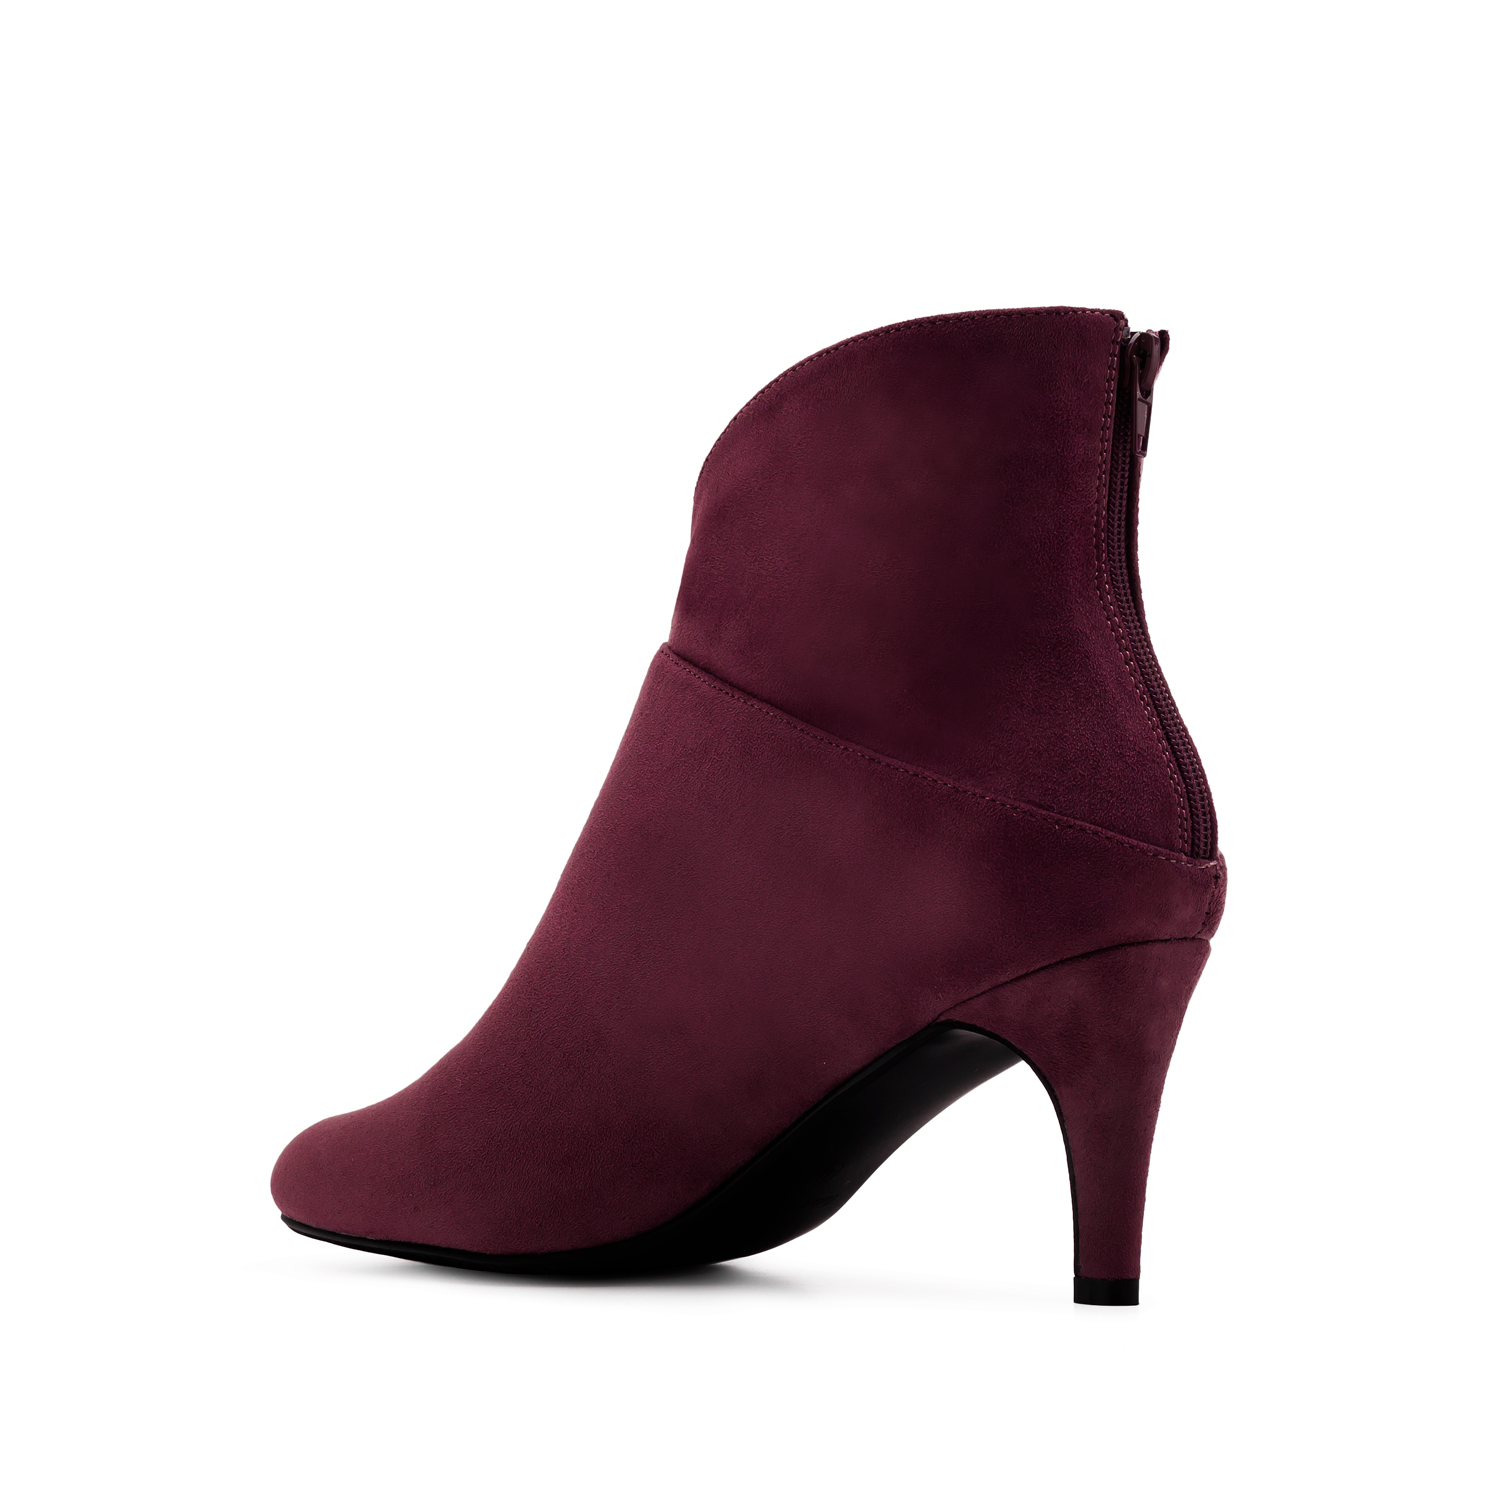 v neck booties